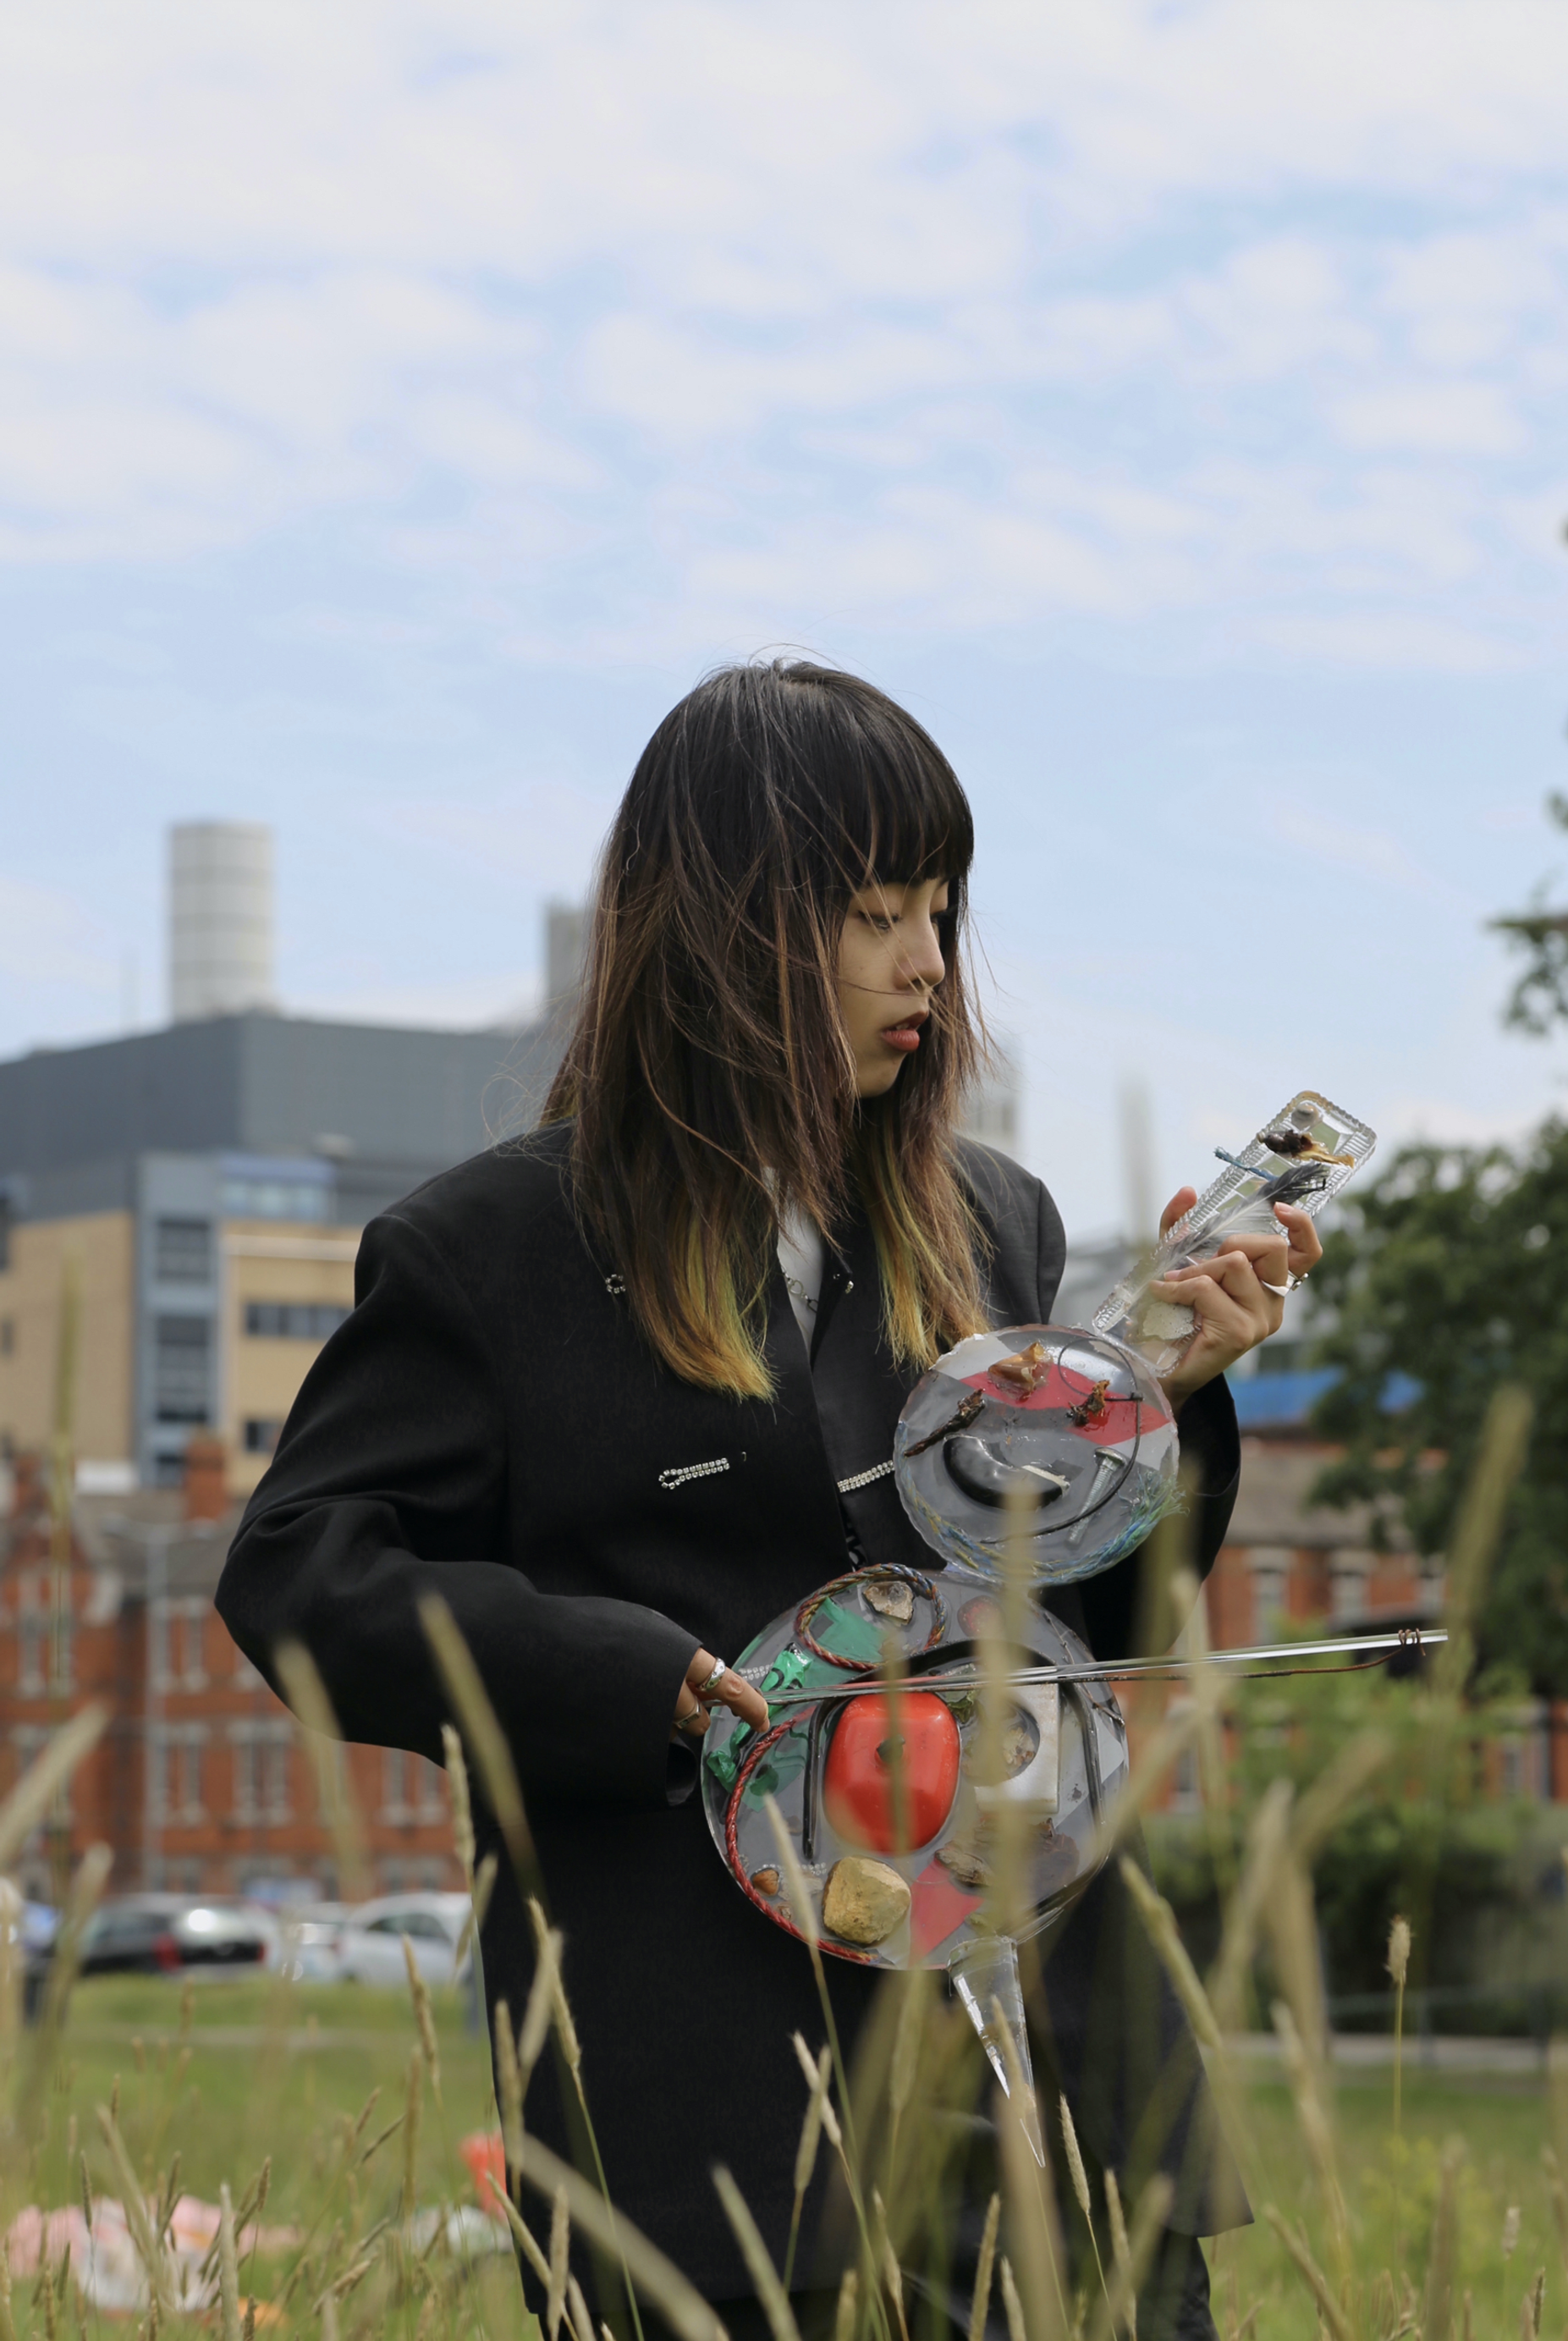 Photograph of a woman from the knees up, standing in a park, with buildings in the distance behind her, playing a musical instrument resembling a large violin made from various materials.